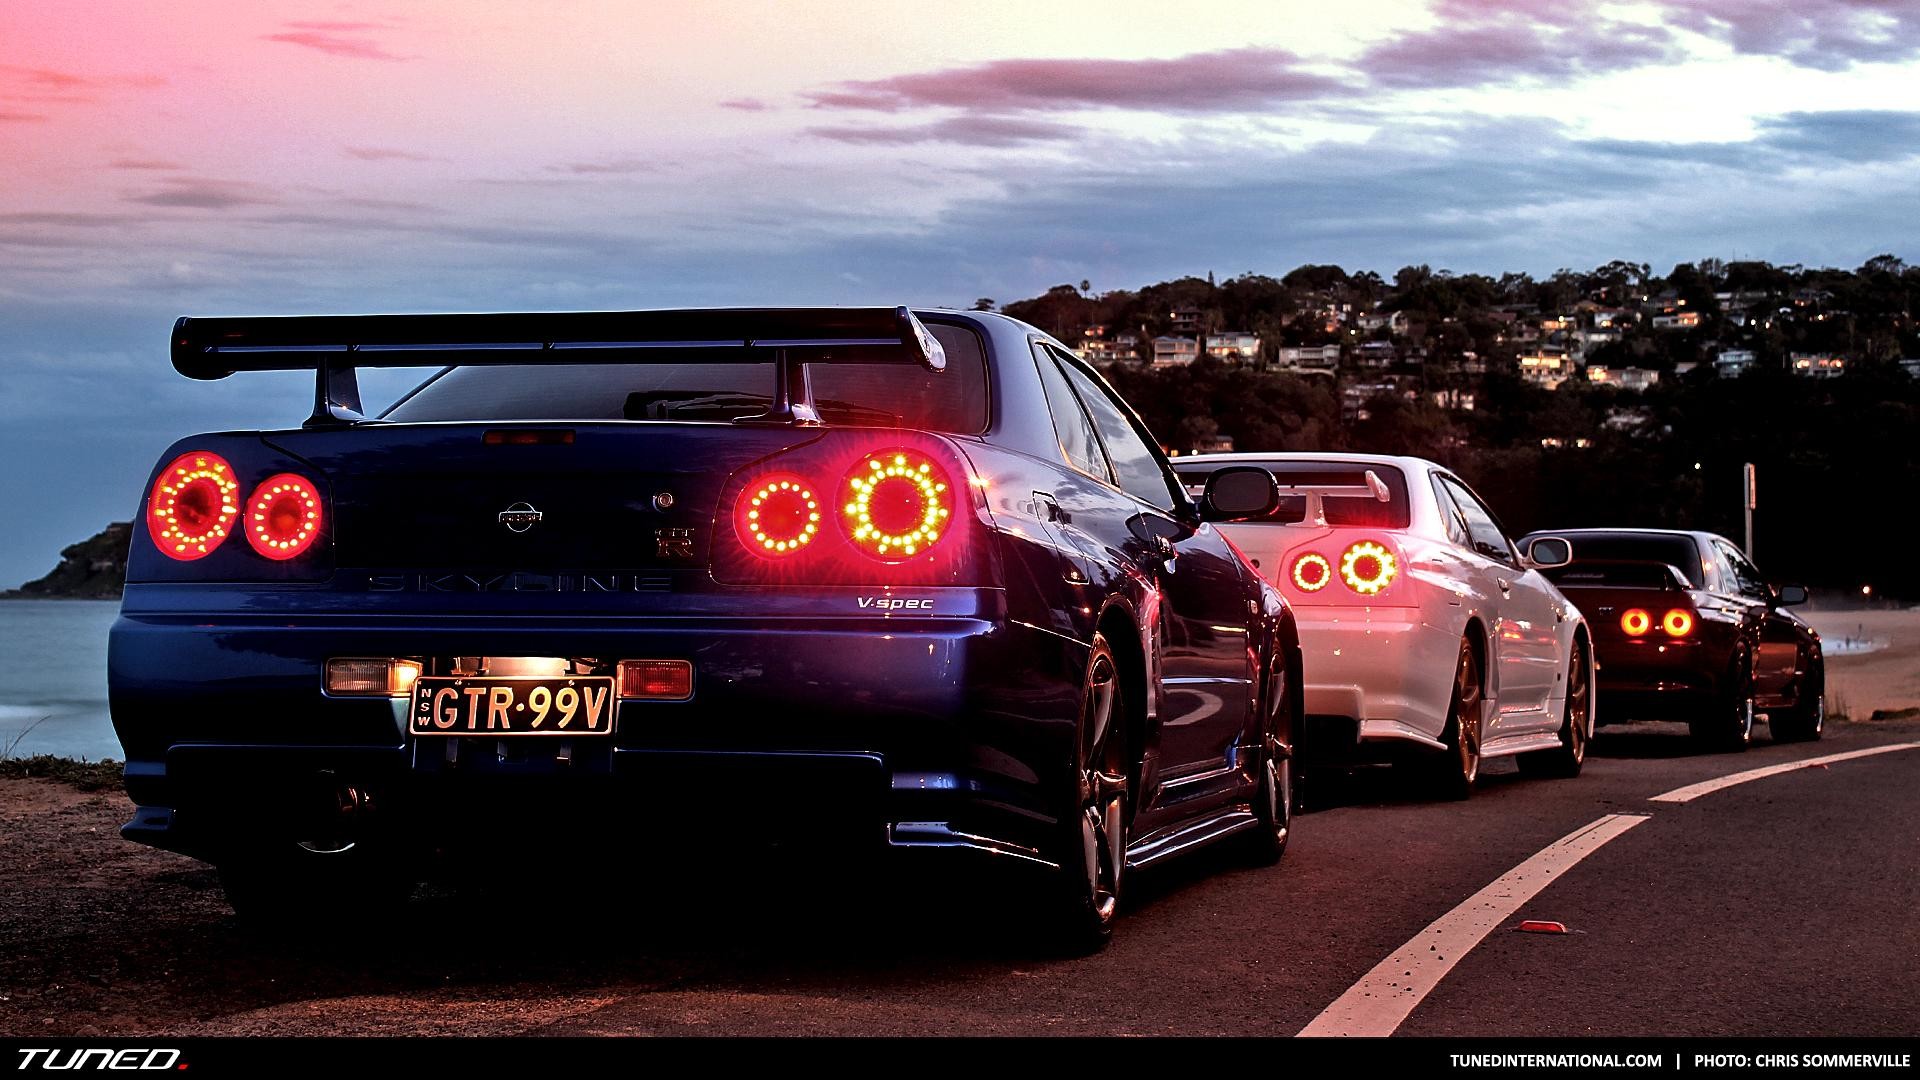 1920x1080 Tags:  Tuning. Category: Cars